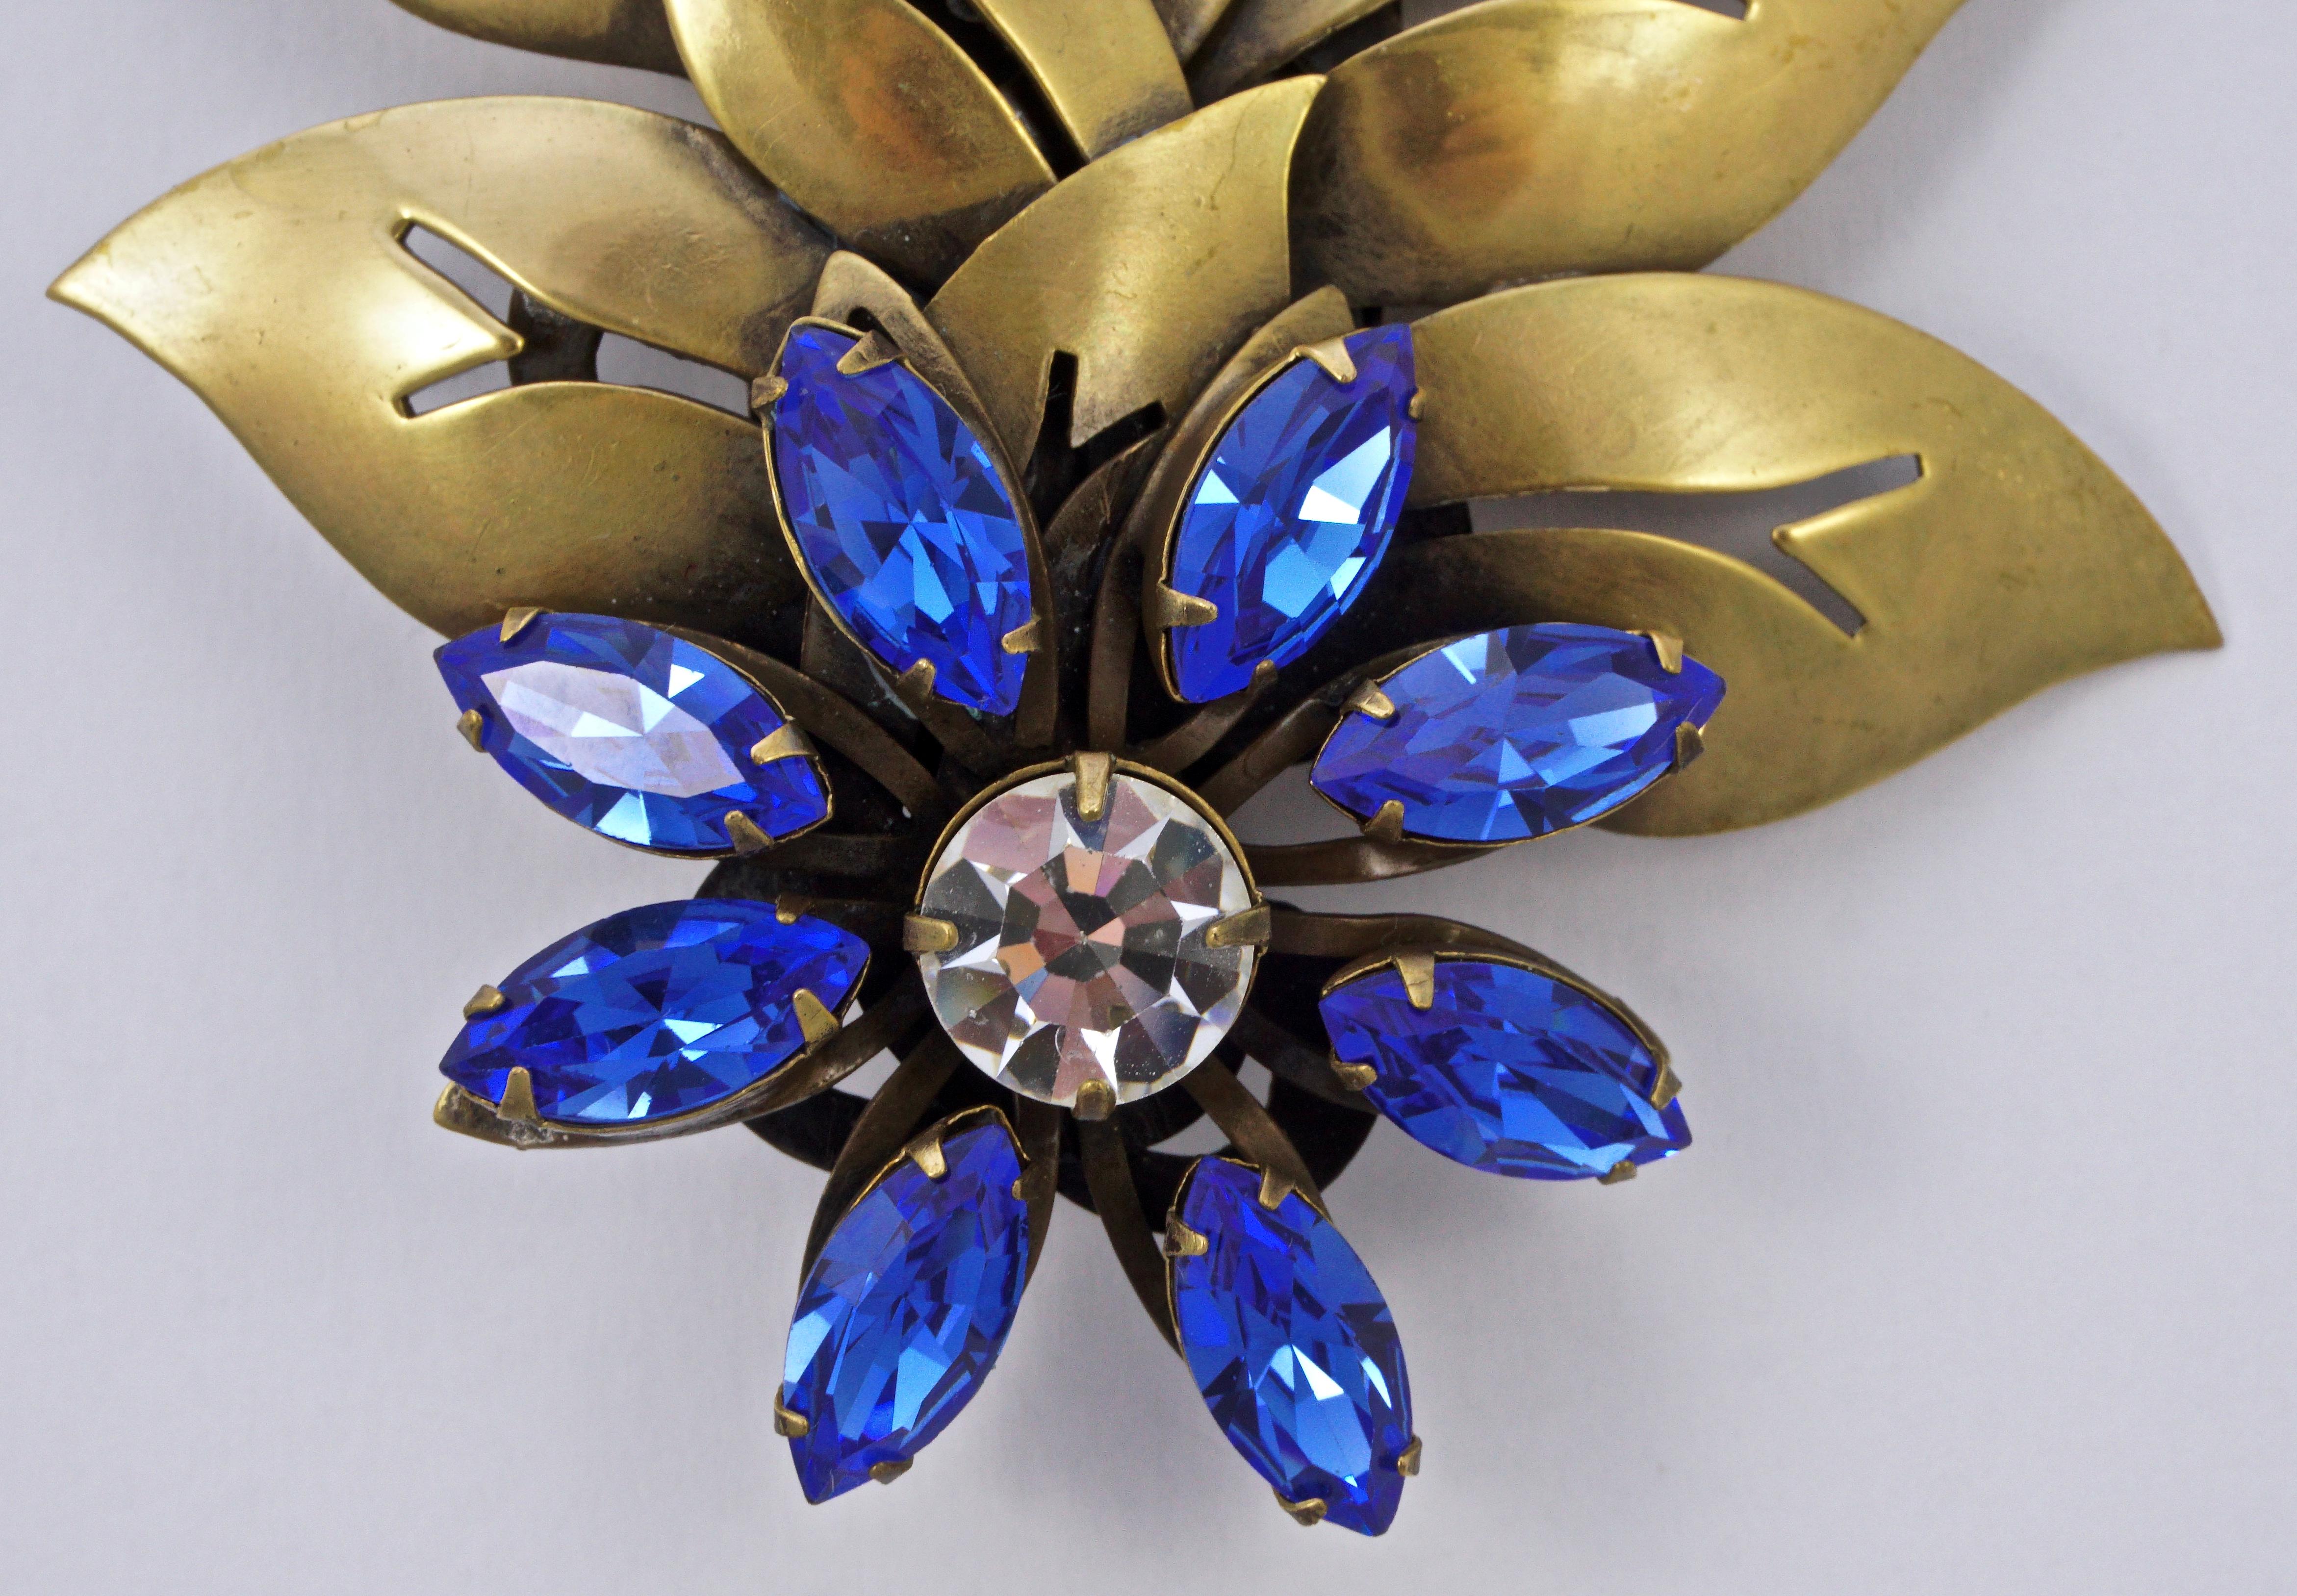 Fabulous Joseff of Hollywood gold plated large flower and cut out leaves brooch, and clip-on earrings set. Featuring dazzling cobalt blue marquise and round clear crystals. The brooch measures 11cm / 4.3 inches by 7.6cm / 3 inches, and the earrings